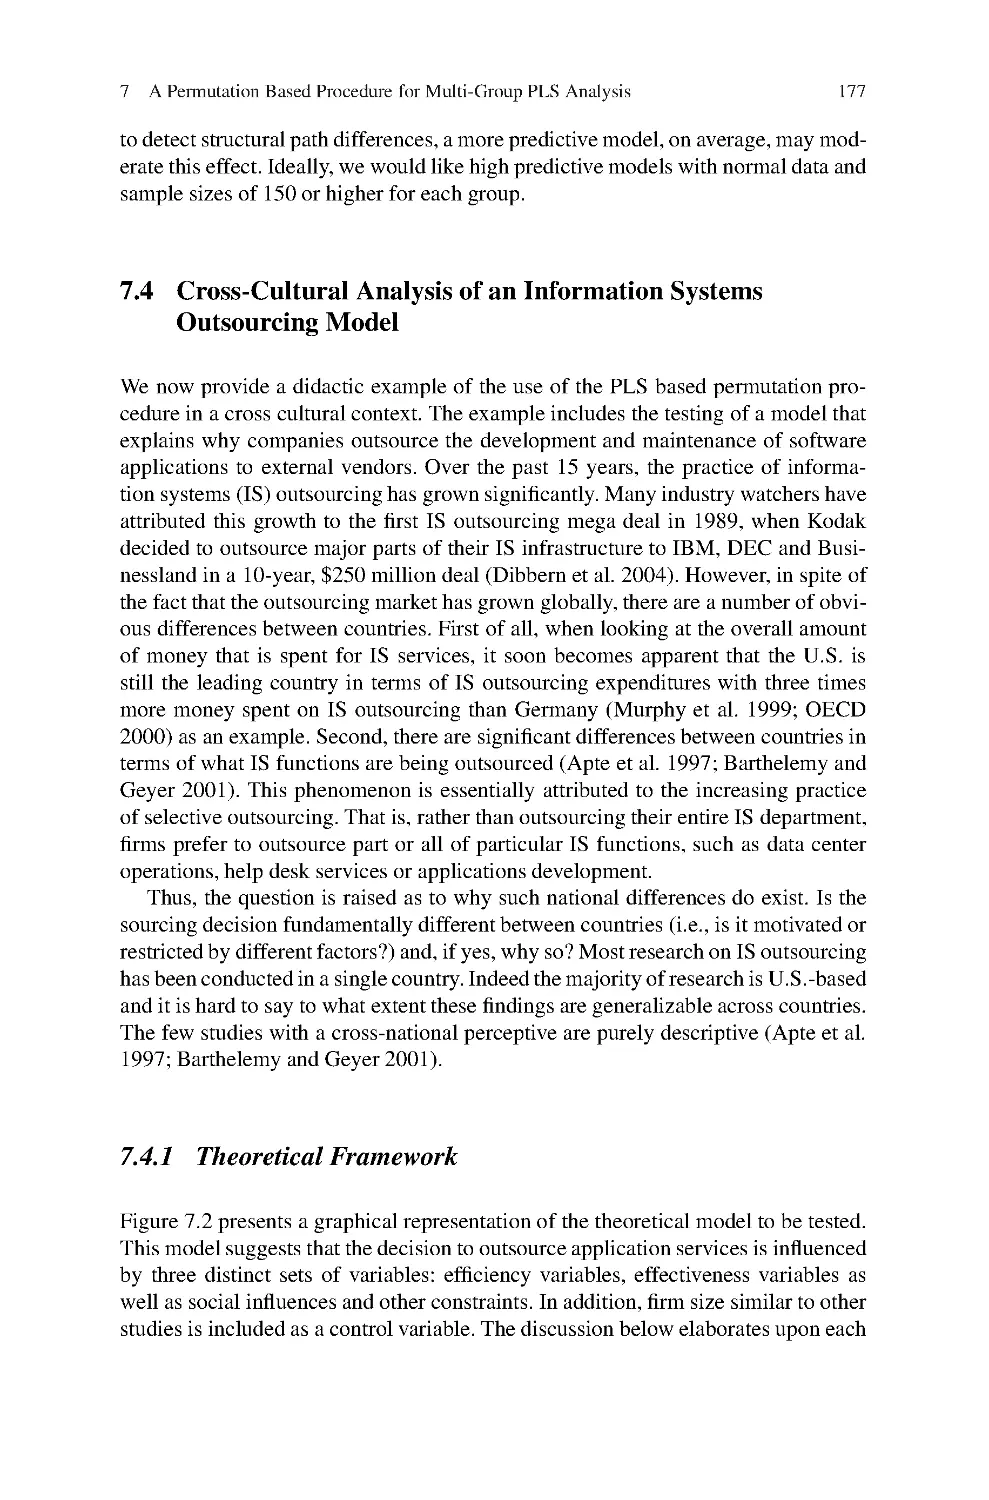 7.4 Cross-Cultural Analysis of an Information Systems Outsourcing Model